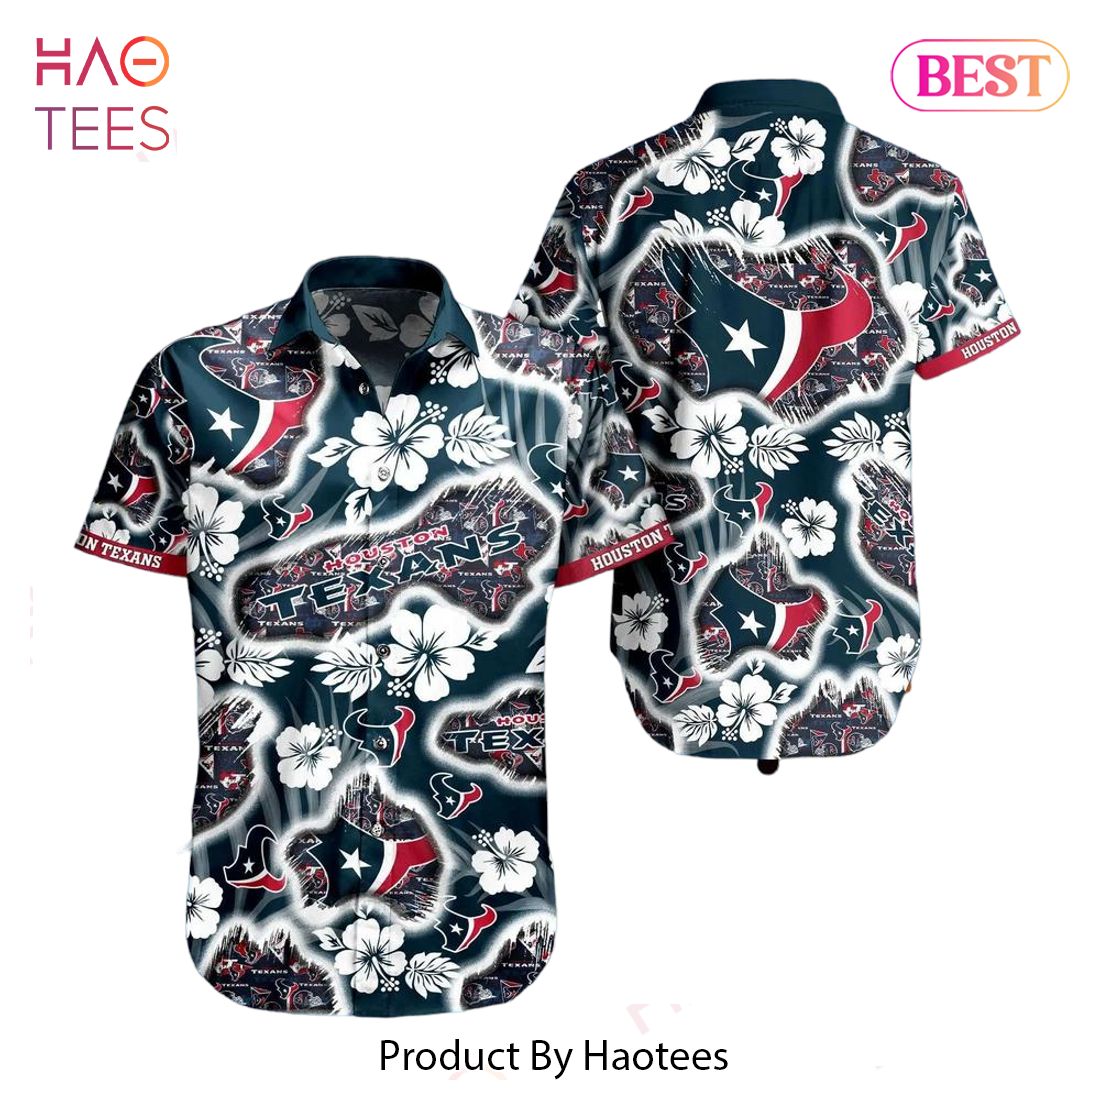 Houston Texans NFL Hawaii Shirt Graphic Floral Printed This Summer Beach Shirt For Fans